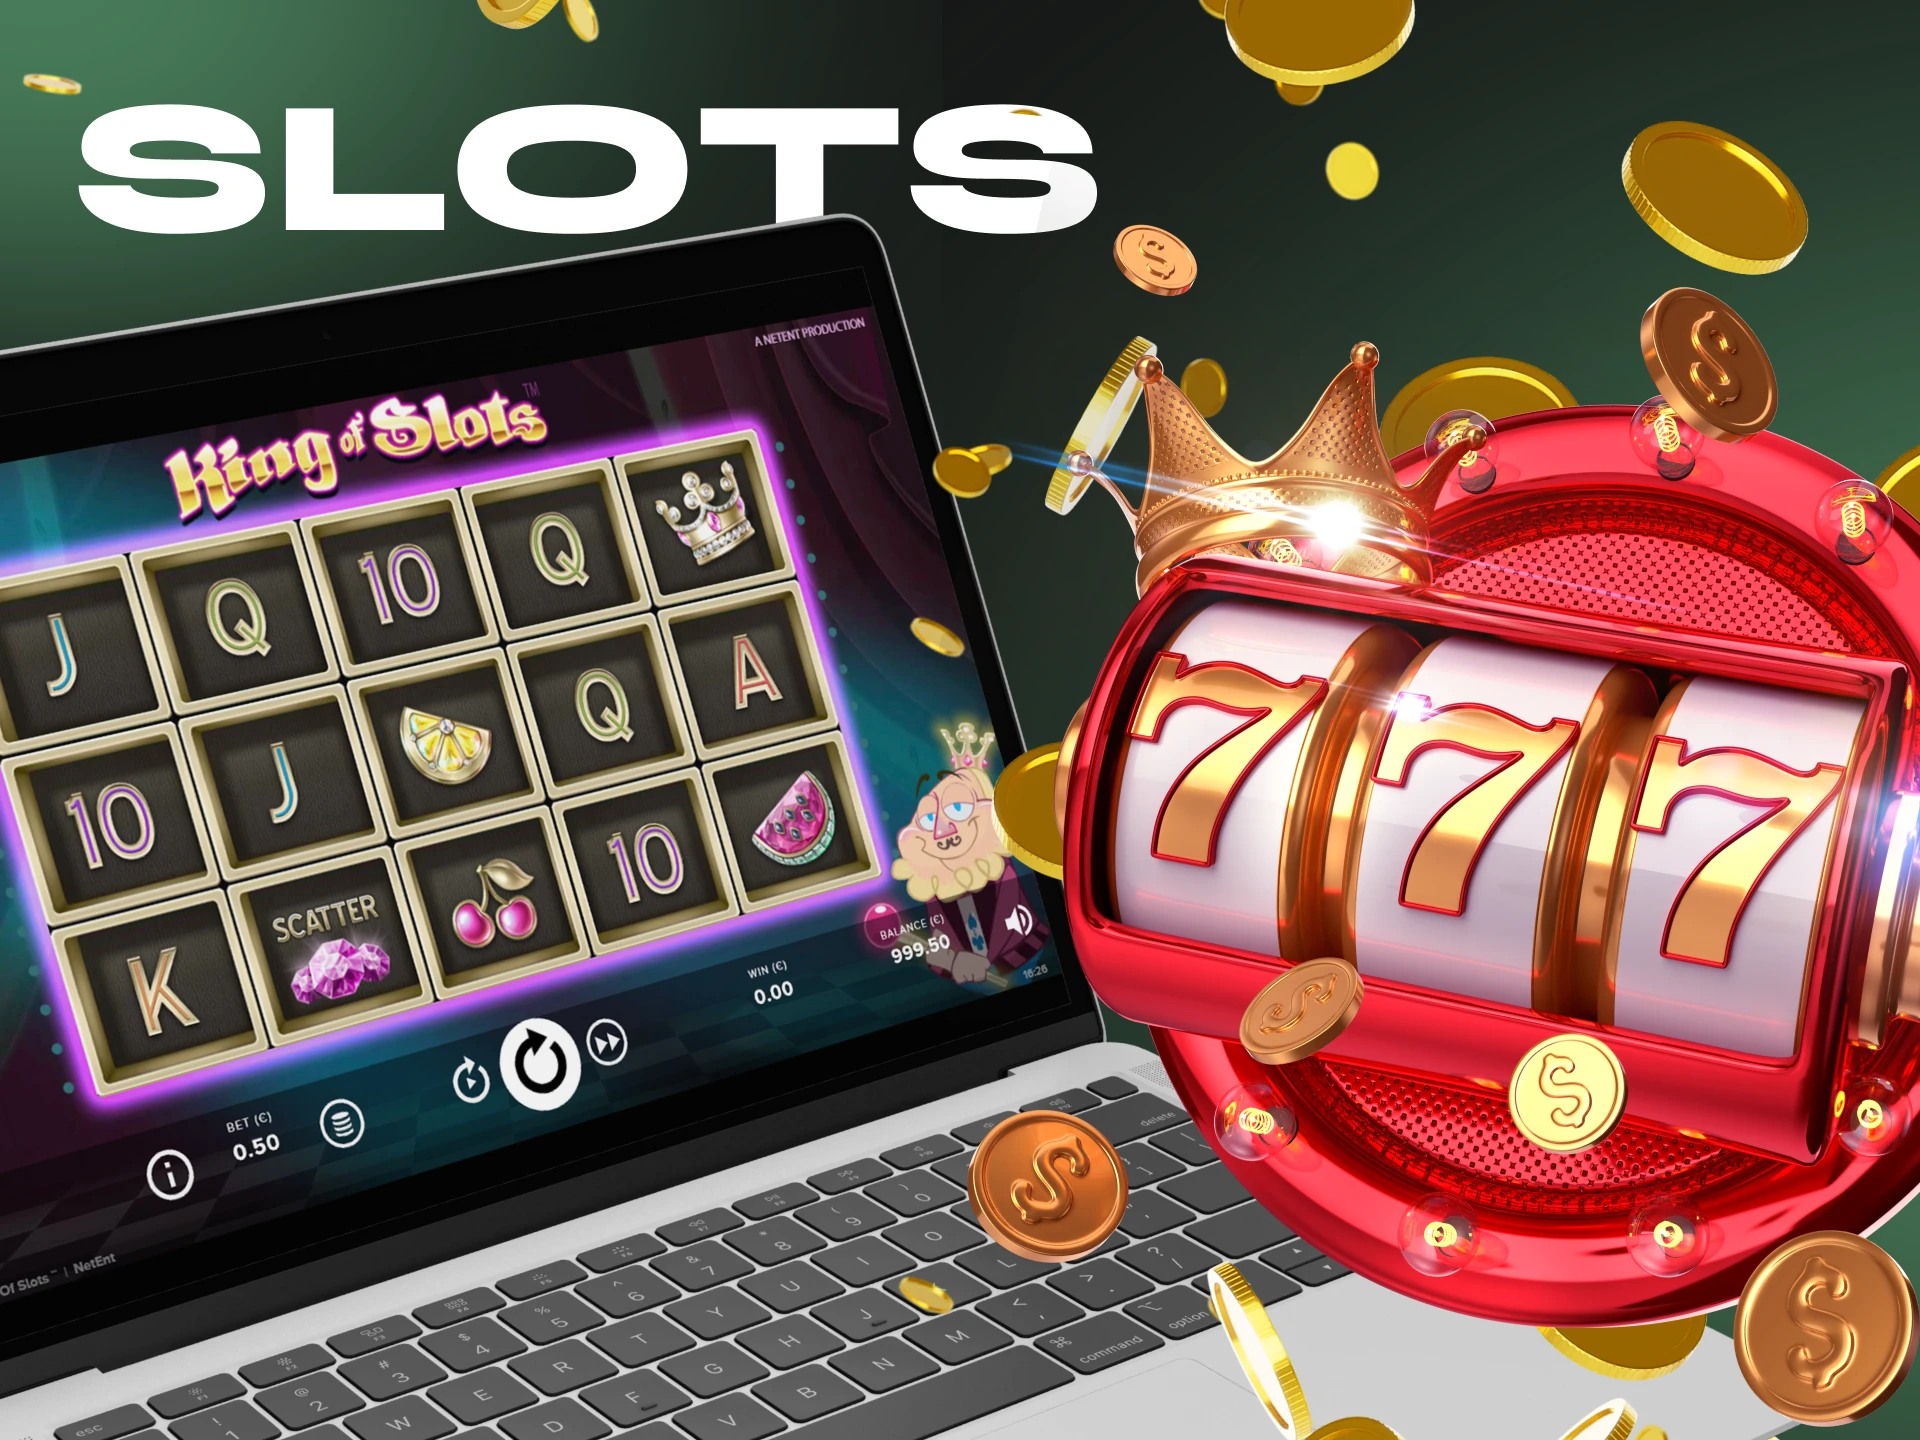 Play slots with coins and tokens in crypto casinos.